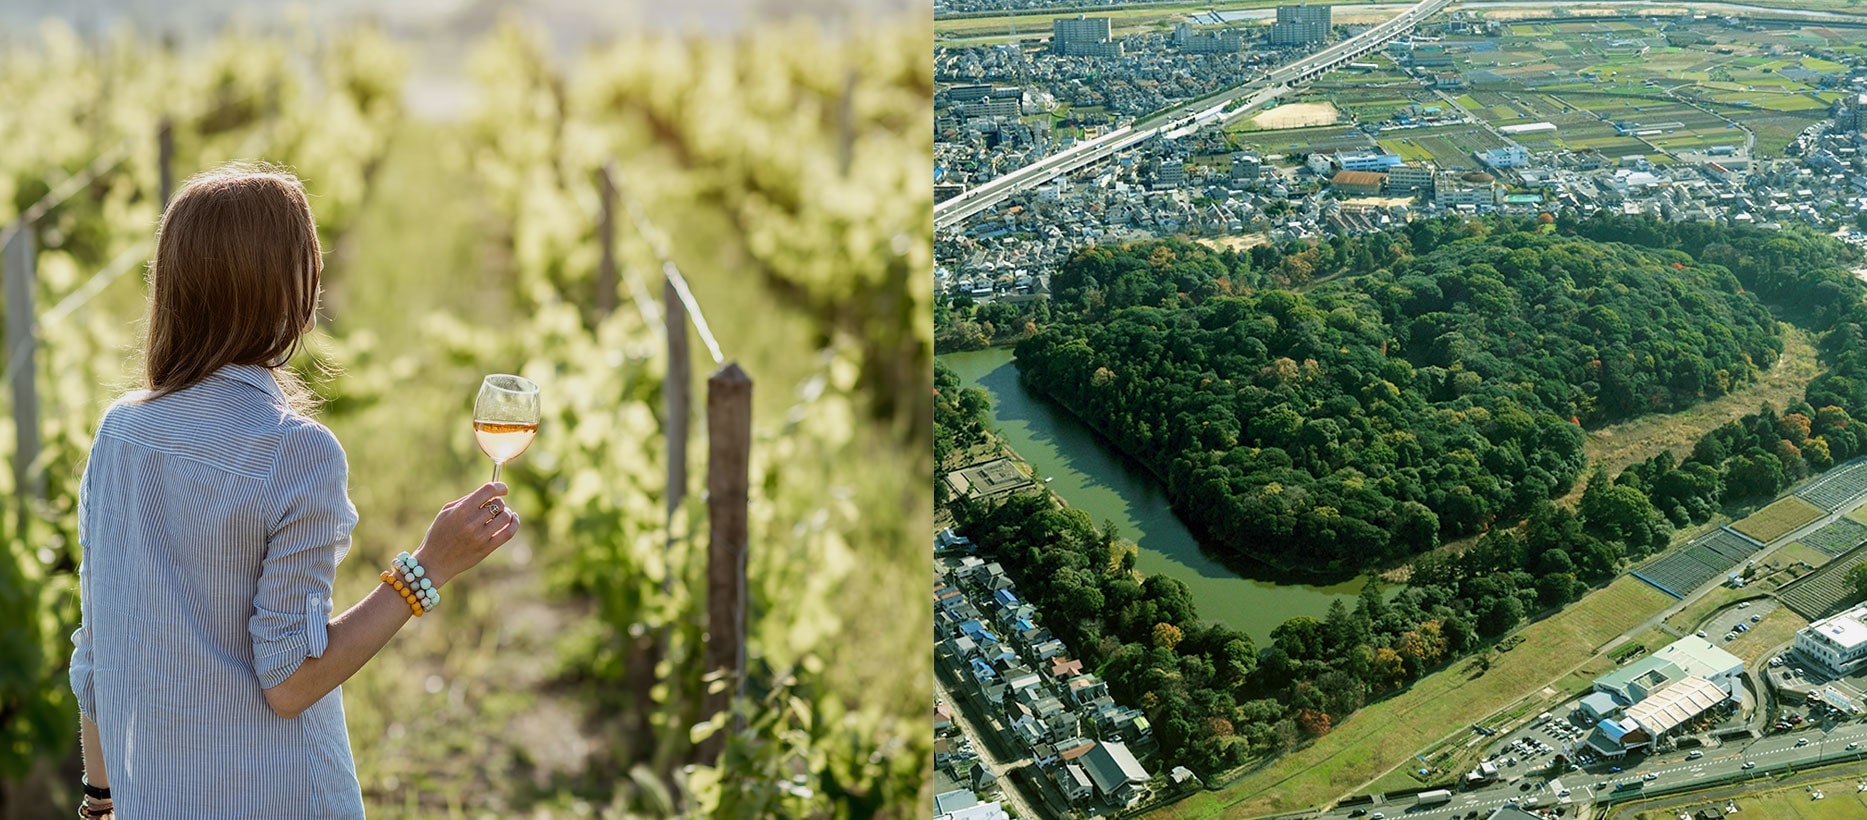 picture:Habikino City’s famous wine, ancient burial mounds